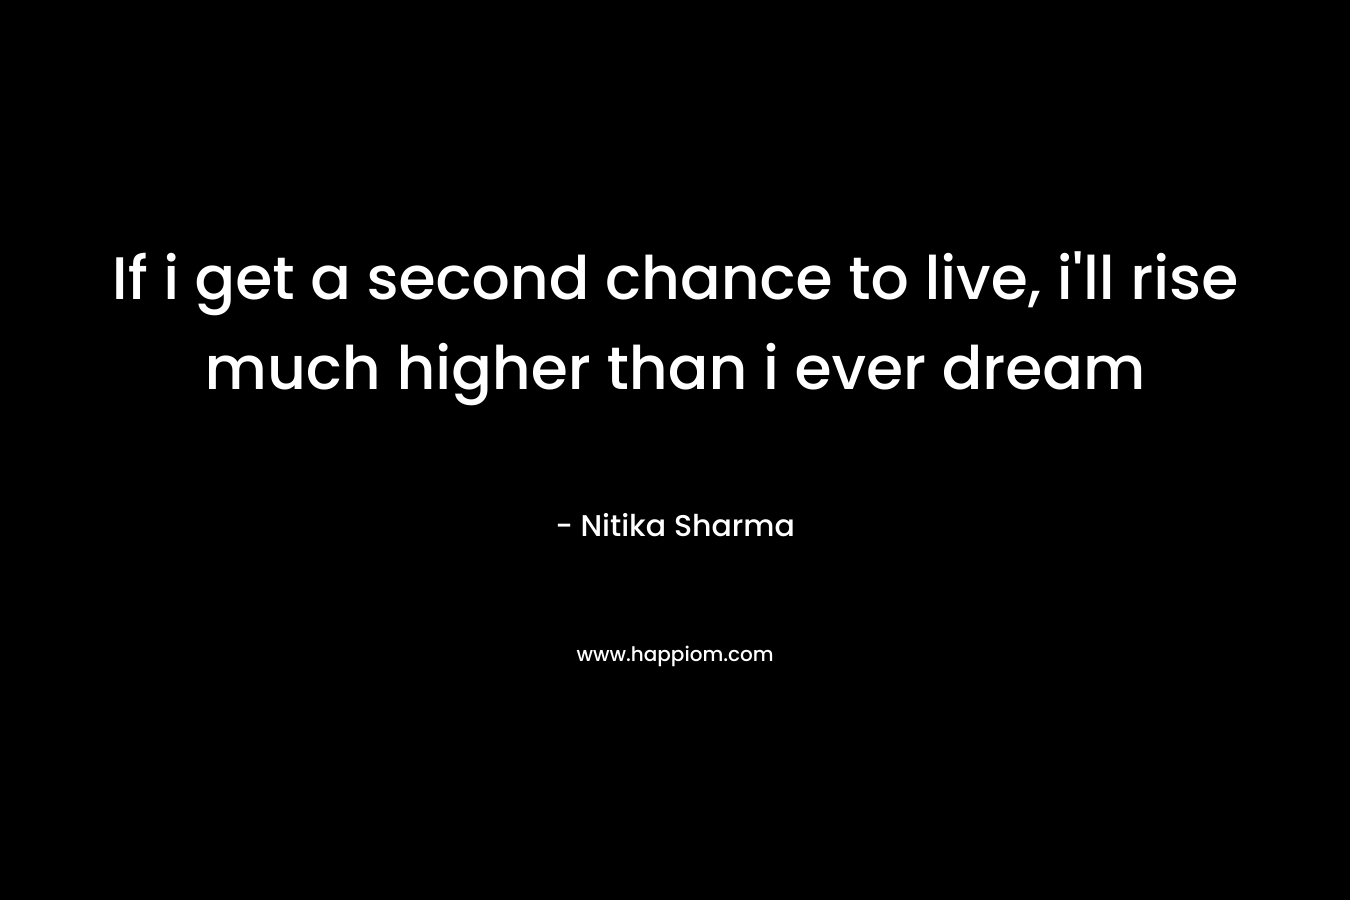 If i get a second chance to live, i'll rise much higher than i ever dream